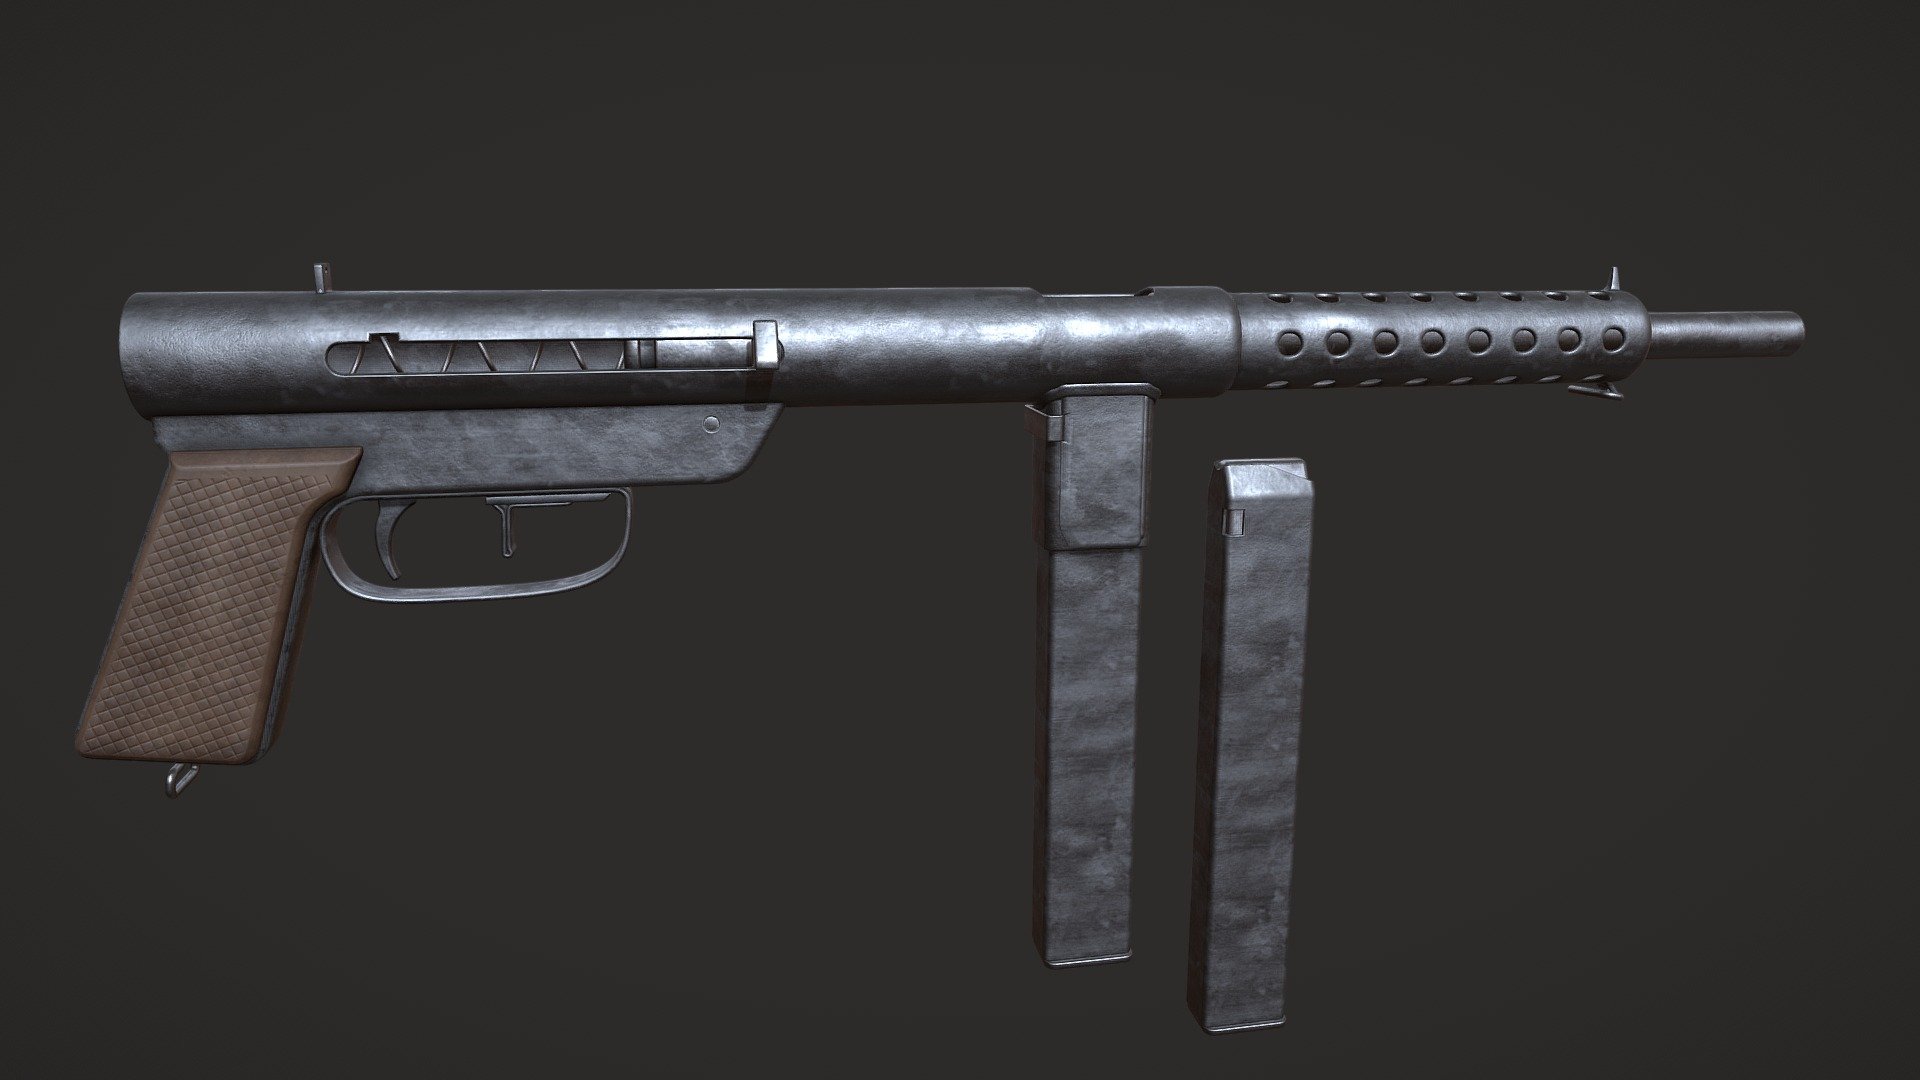 A 3d model based on a museum example of a sten like submachinegun in the Polish military museum in Warsaw, the submachinegun or &ldquo;SMG